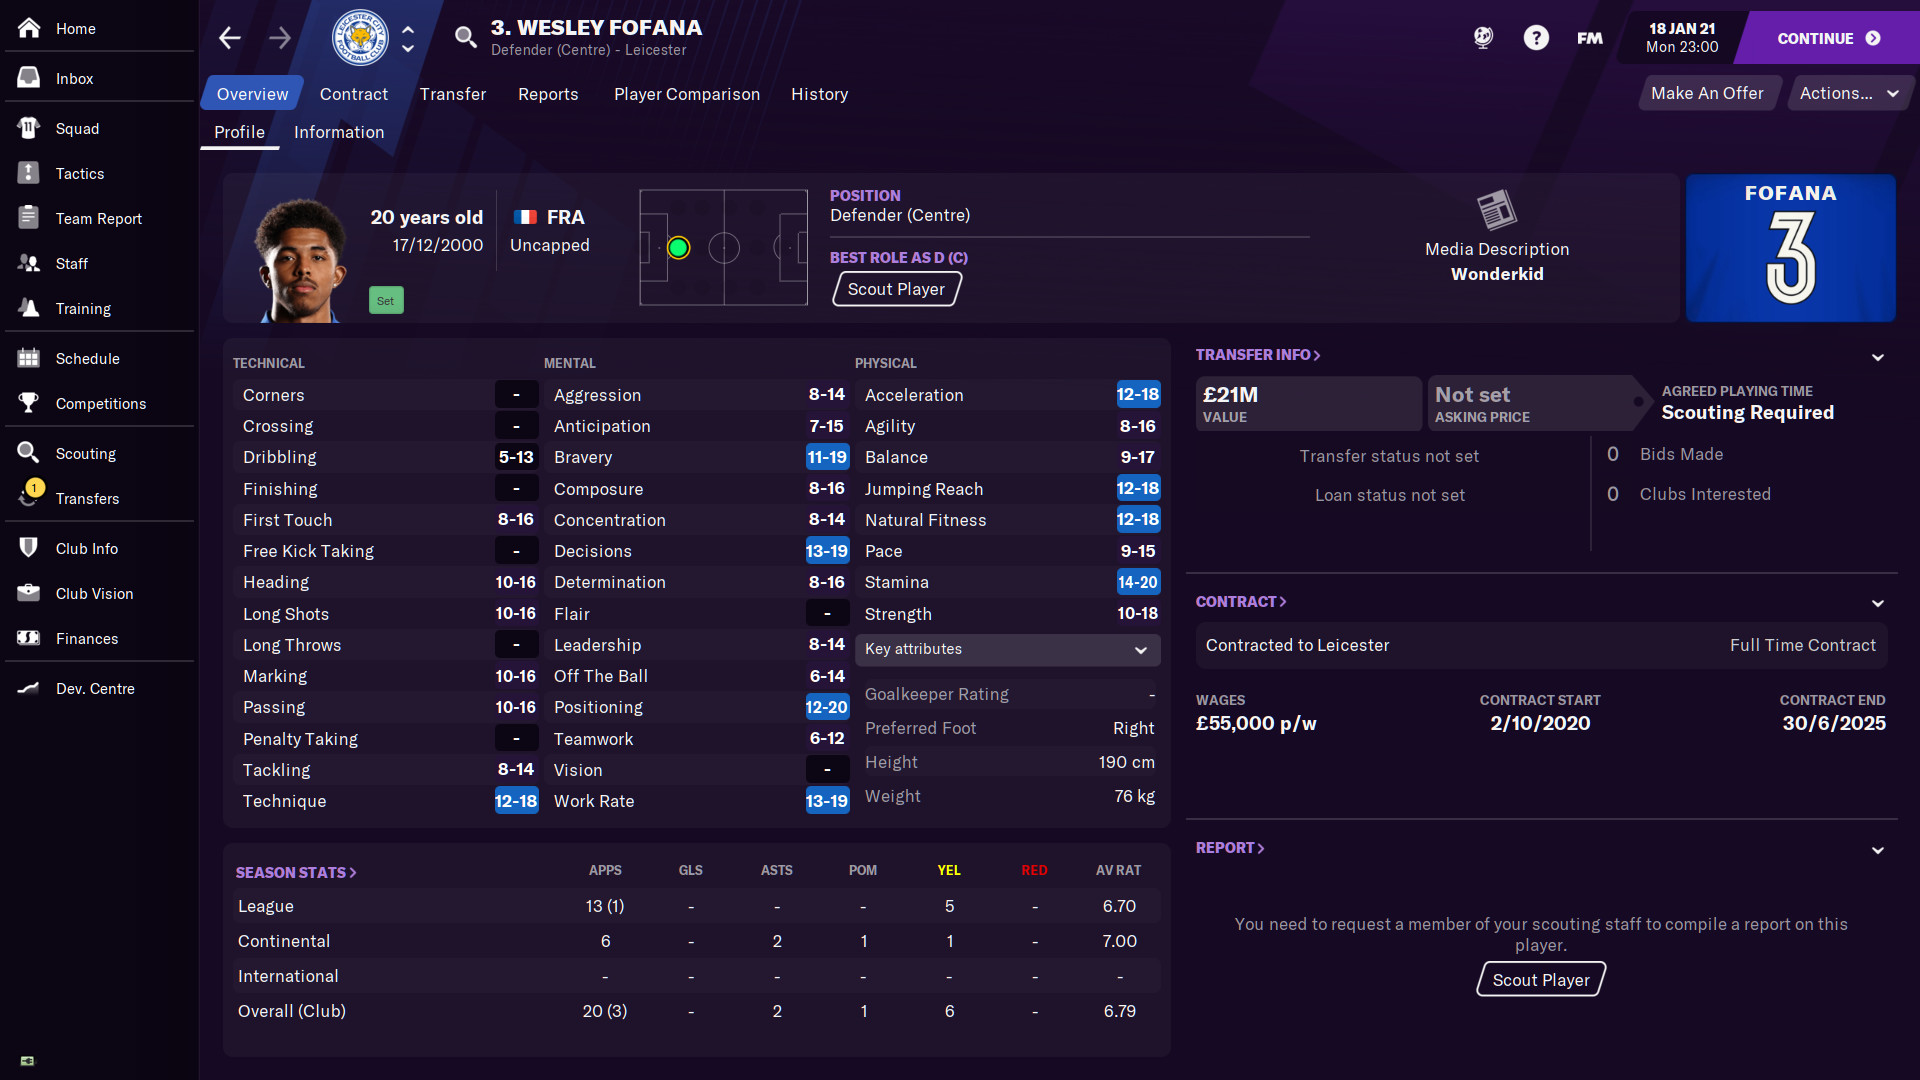 Football Manager 2021 Touch - Attribute Masking Featured Screenshot #1